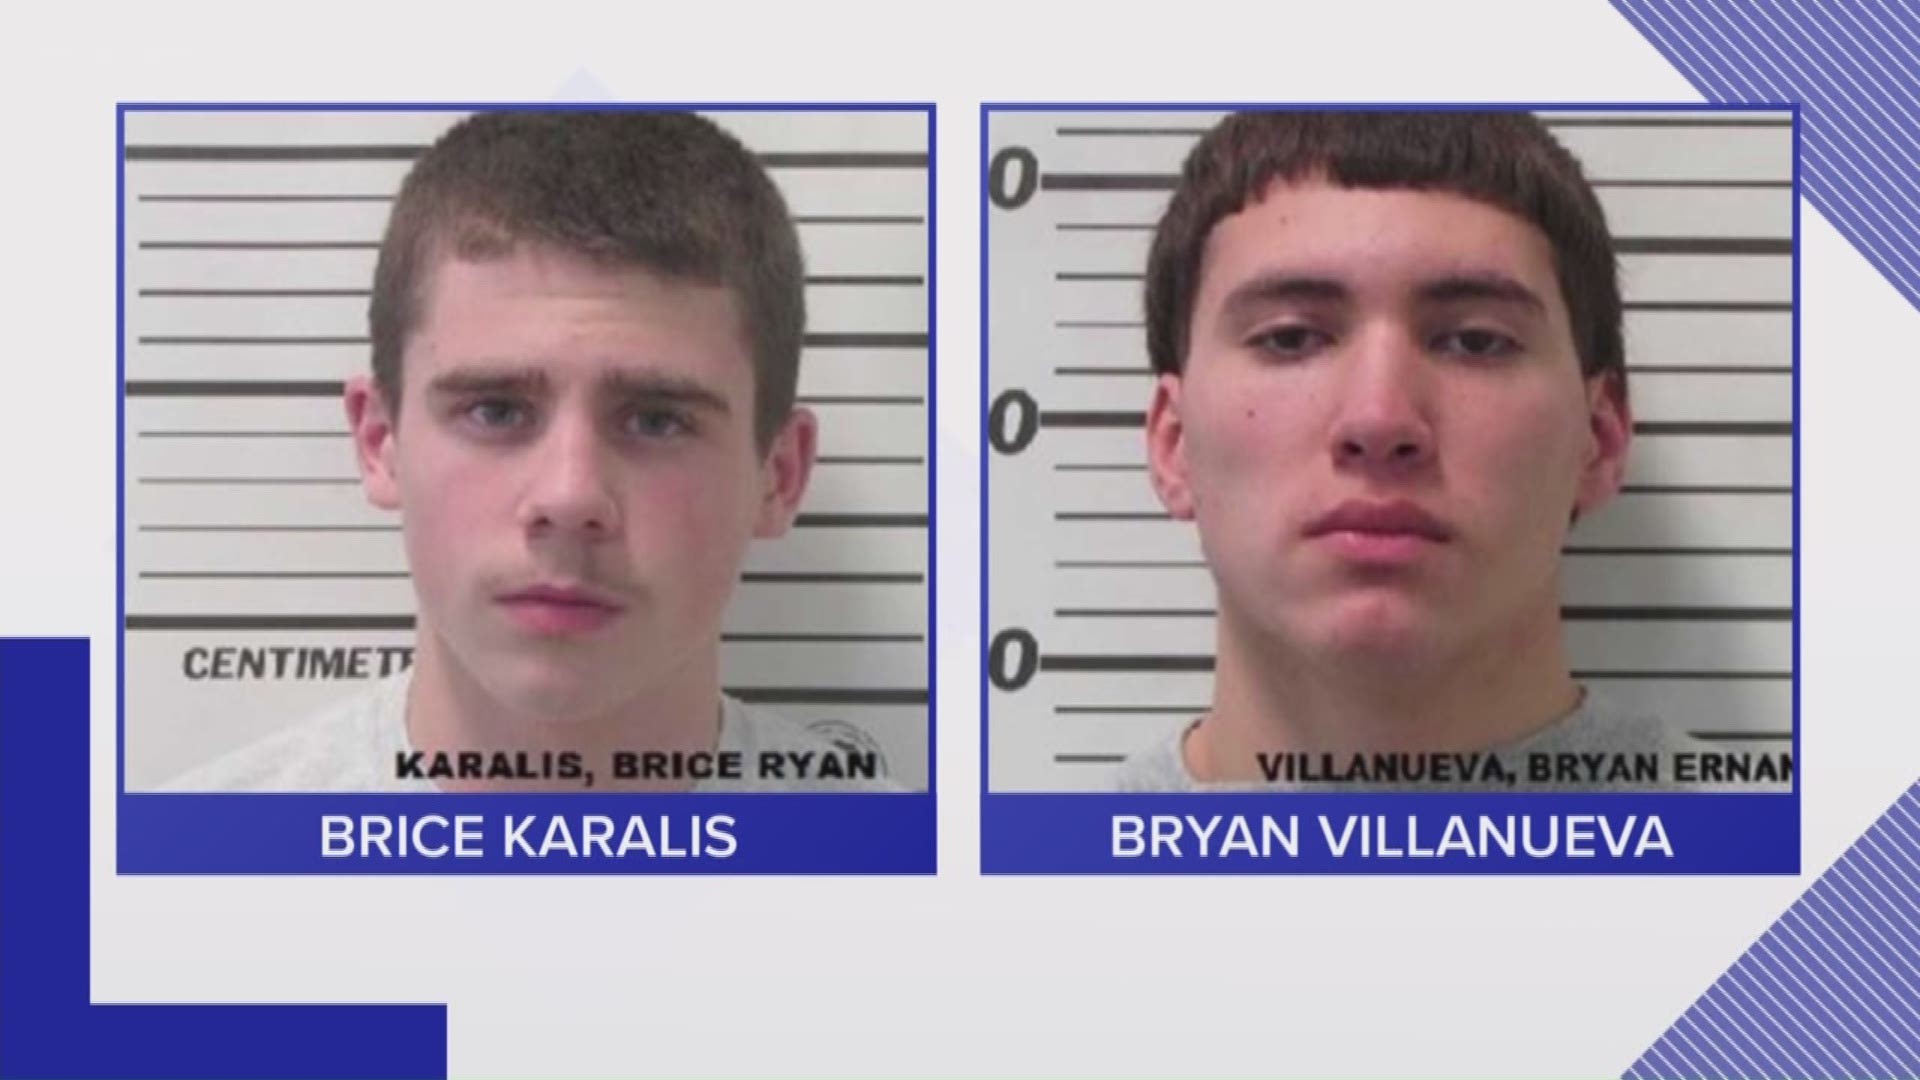 The search is over for two teens who escaped from a correctional facility in Lee County.